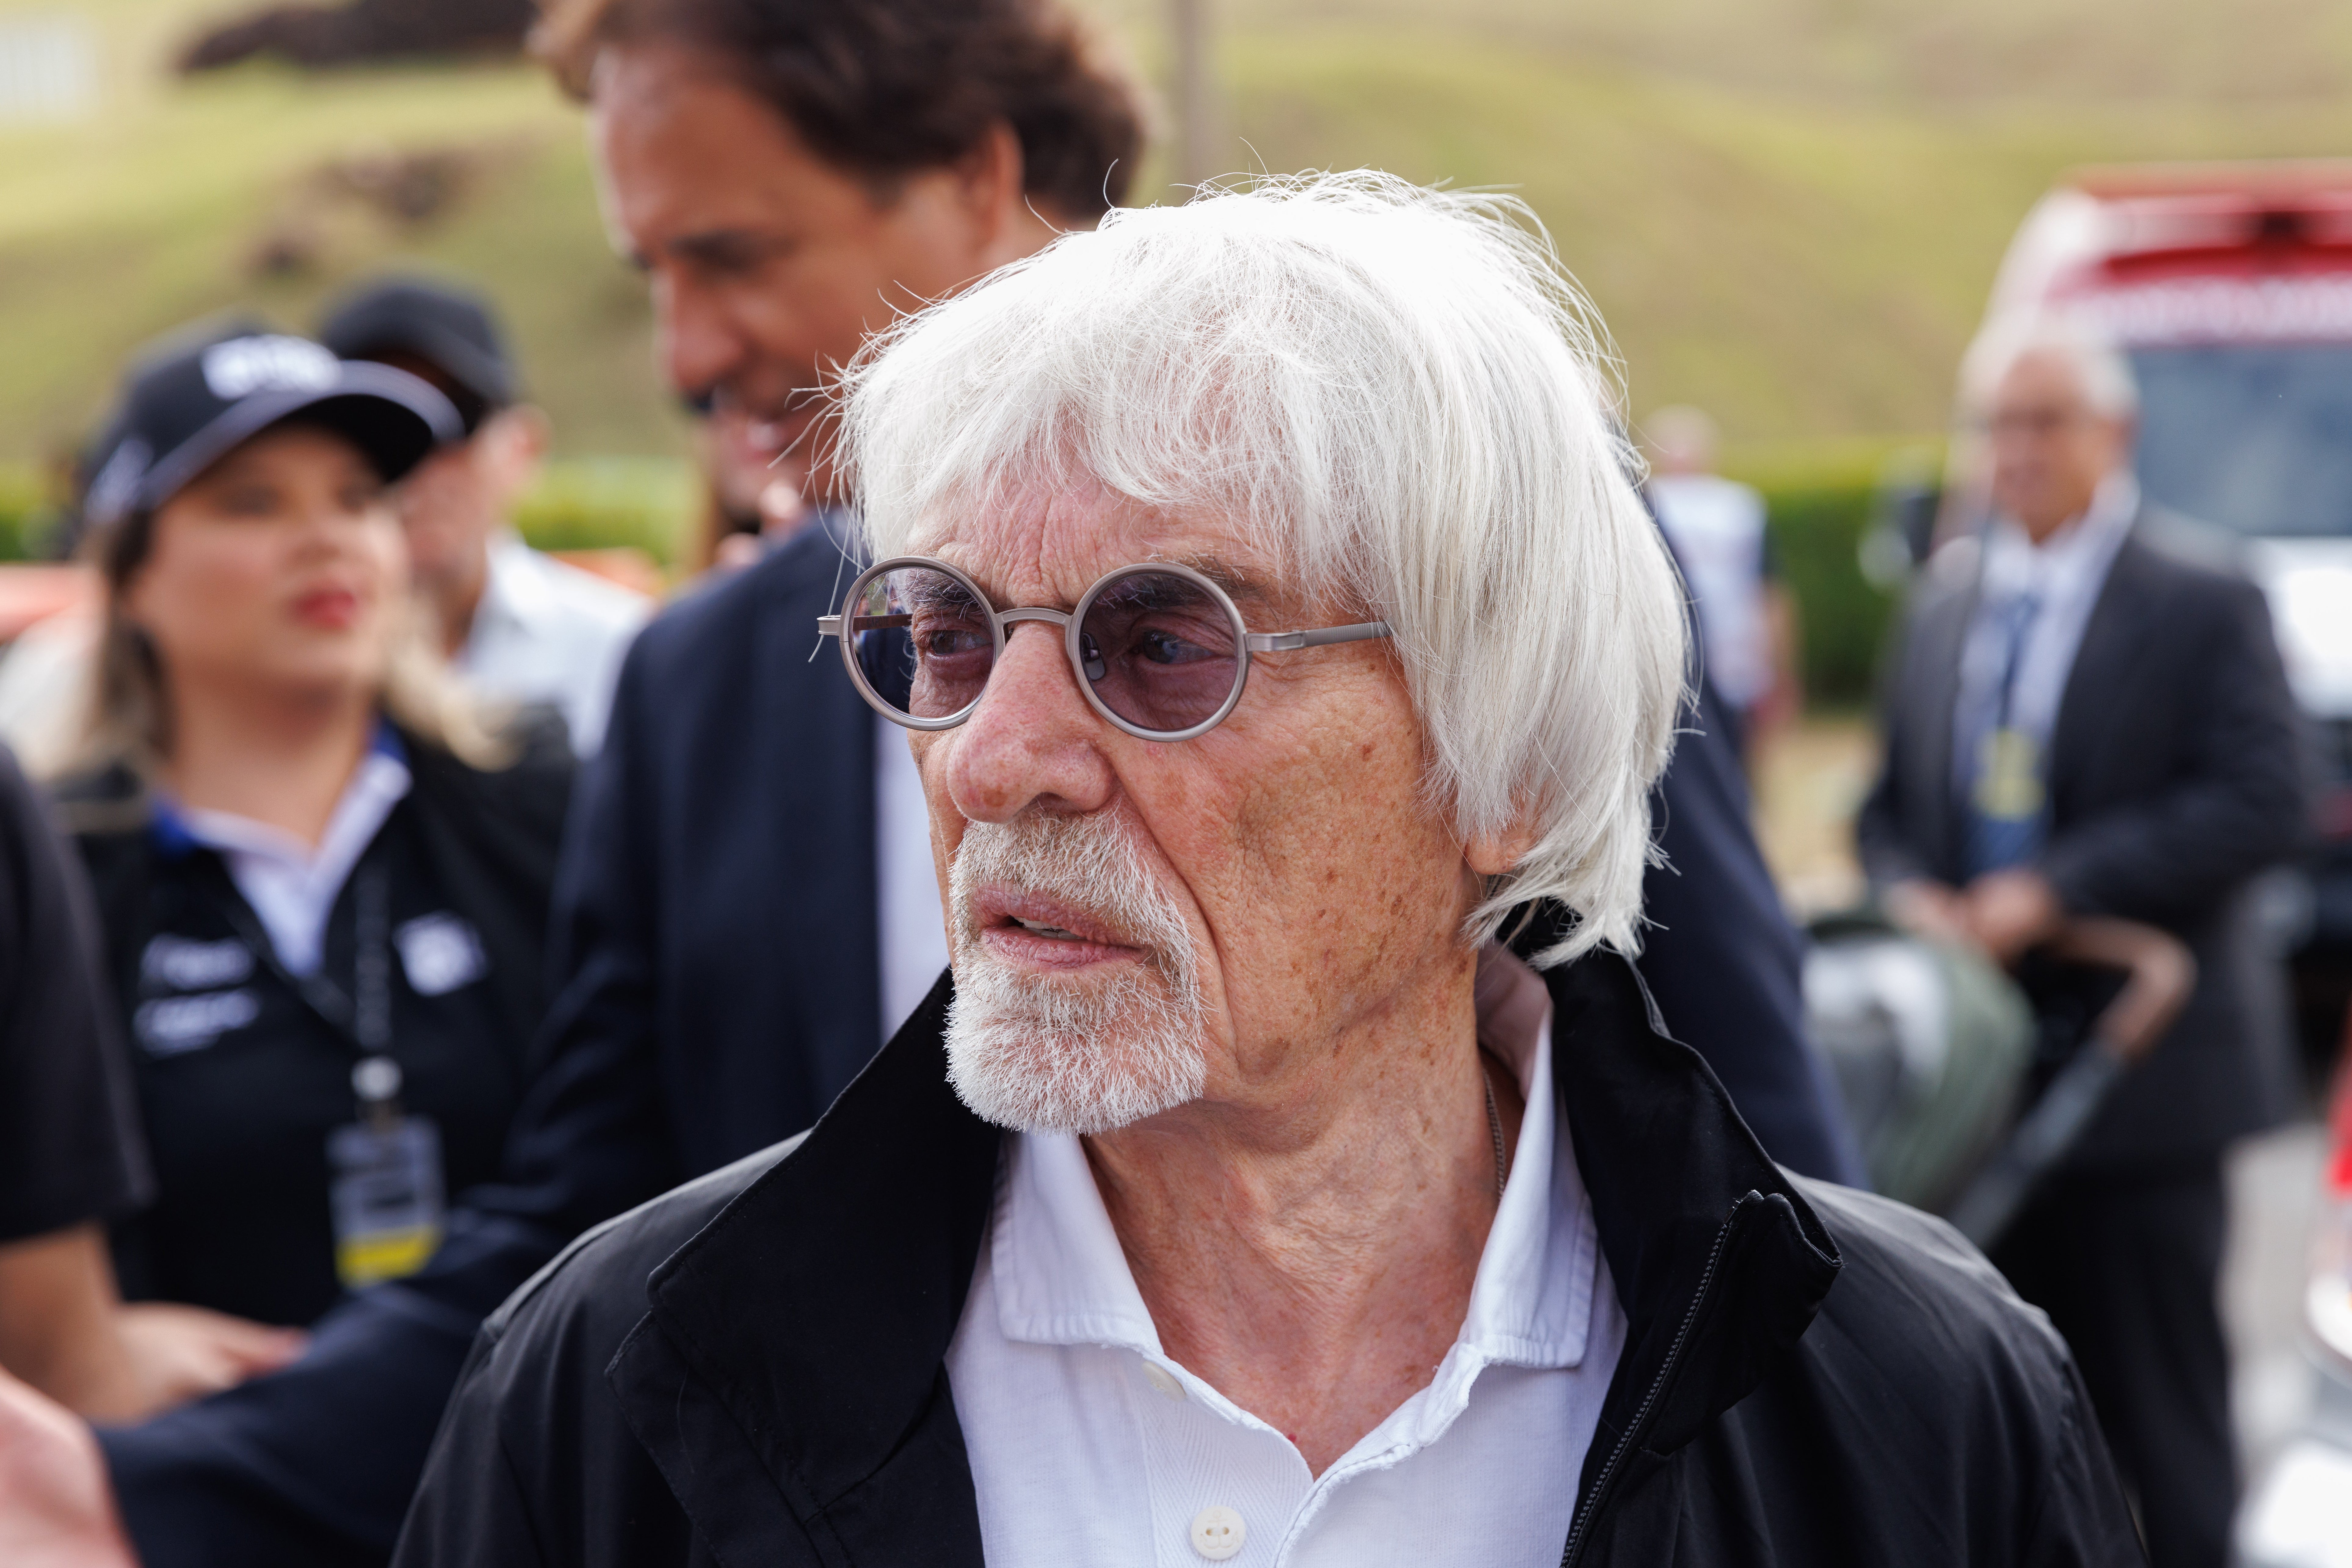 In a week that was already damning for his sport, Bernie Ecclestone decided to drag F1’s reputation through the mud